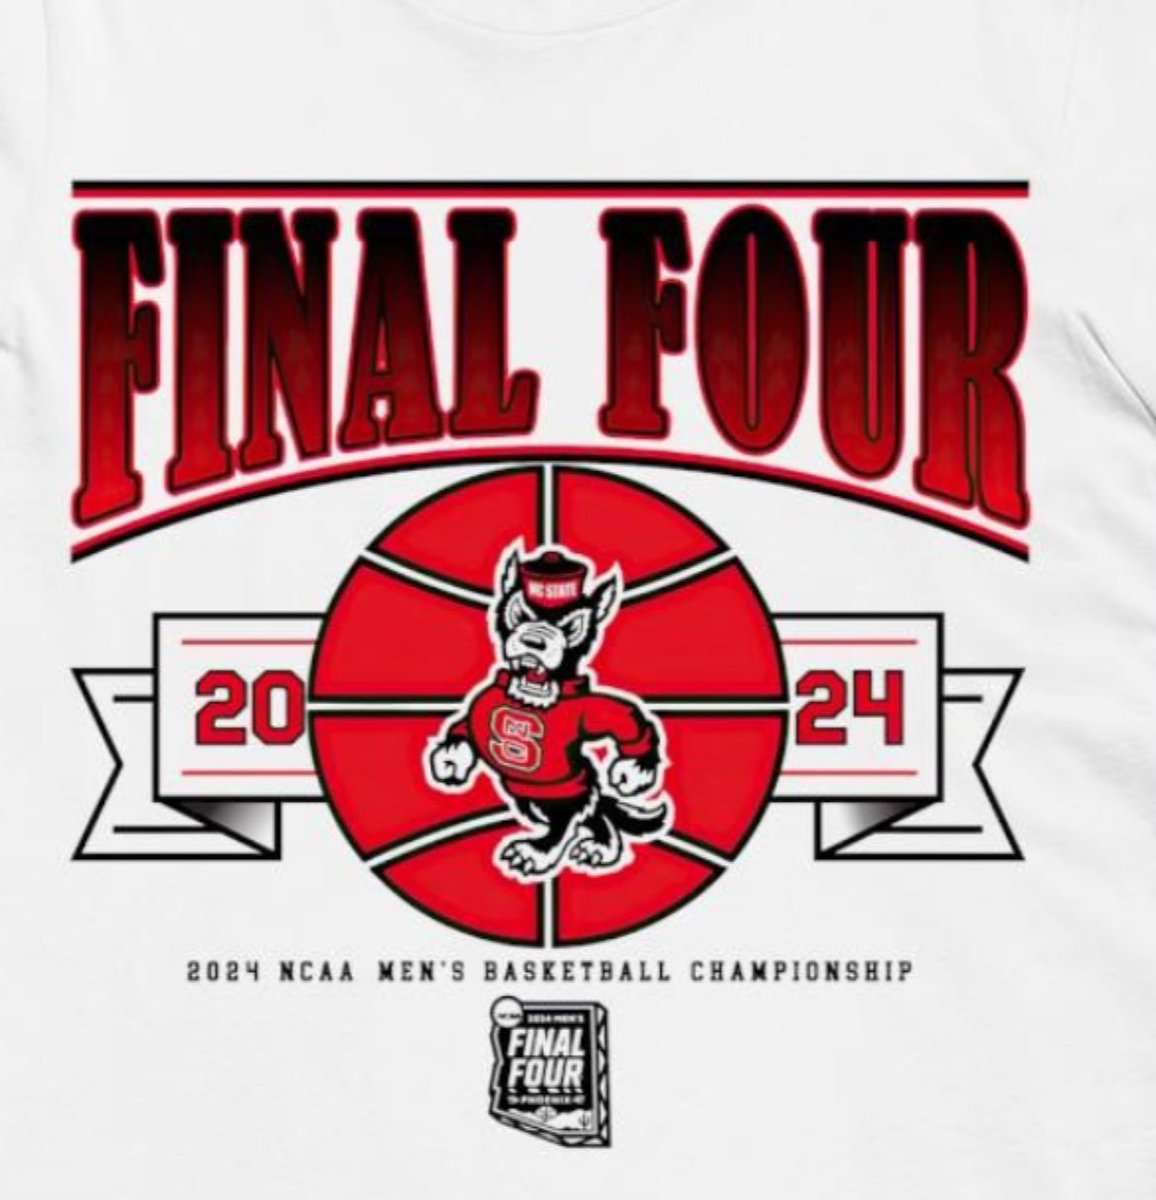 “NOTHING  CAN HAPPEN UNLESS IT’S FIRST A DREAM” 🏀👍🏻Jimmy Valvano
Dream Big tonight NC State #final4 #NCState